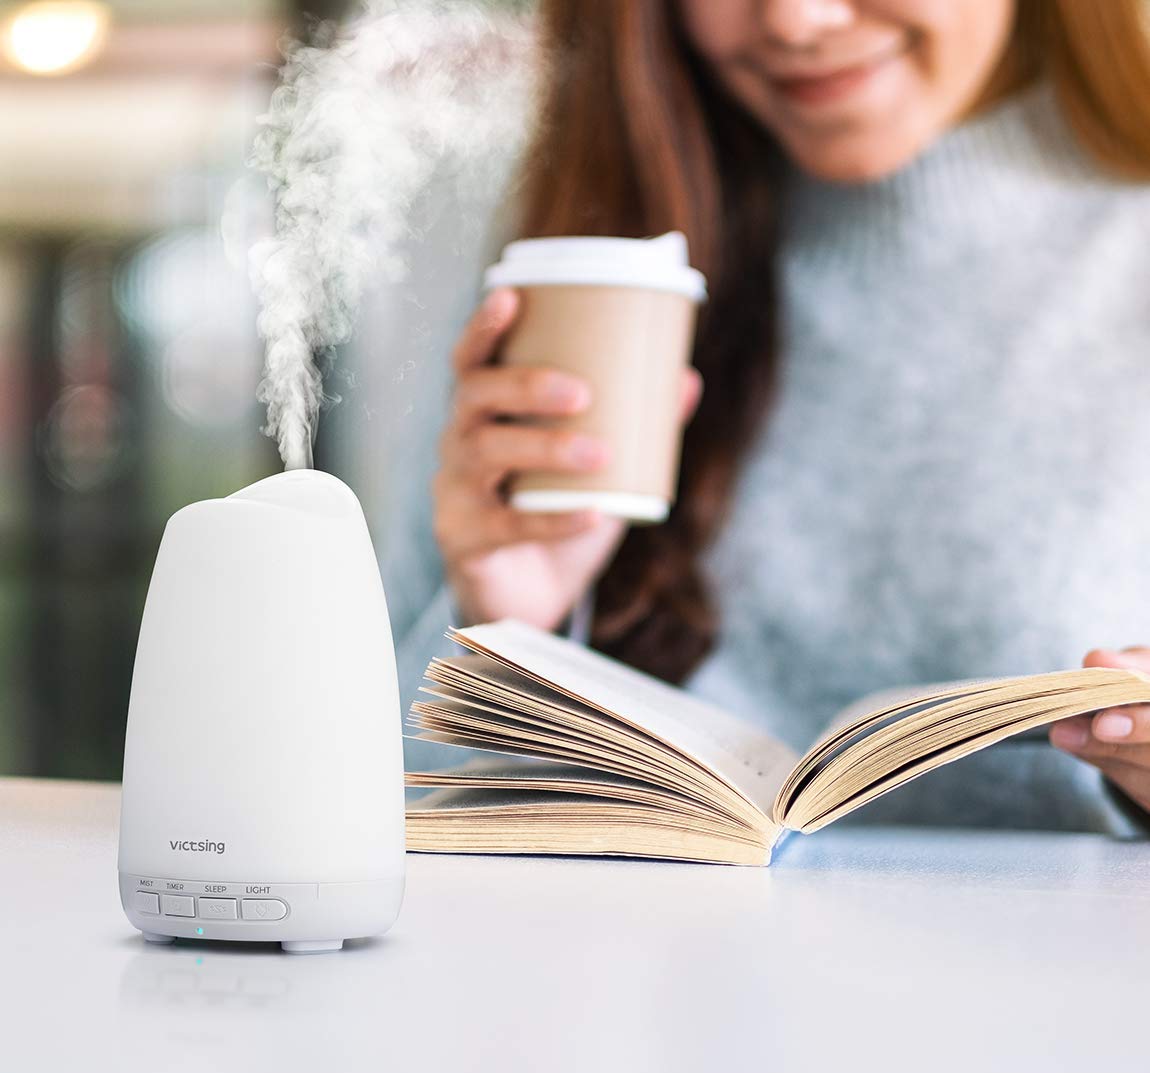 VicTsing + Essential Oil Diffuser, Ultrasonic Cool Mist Humidifier